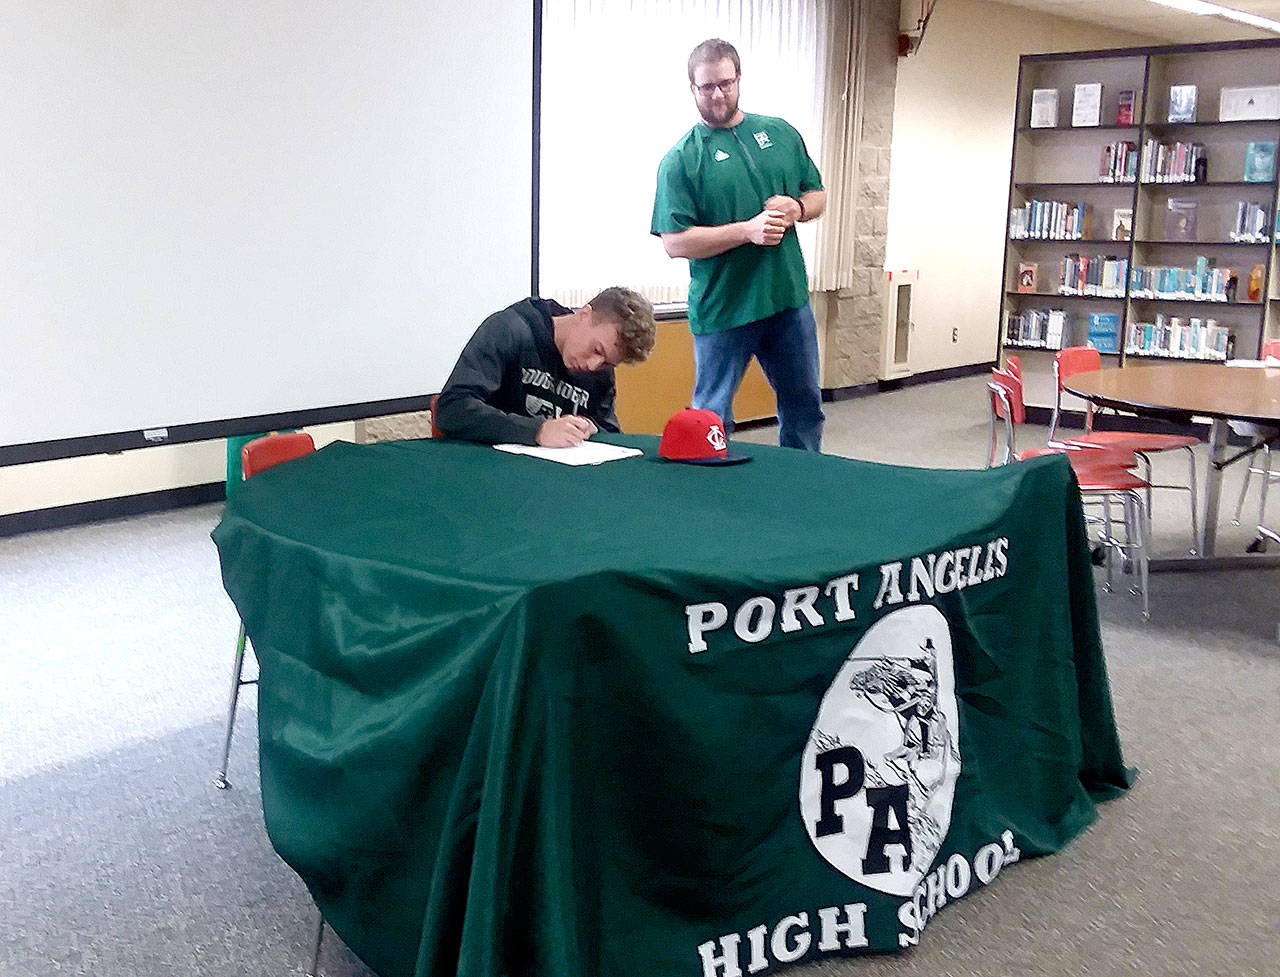 Port Angeles Roughrider baseball coach Karl Myers watches as his star catcher, Joel Wood, signs a letter of intent to attend Lower Columbia College in Longview at Port Angeles High School on Saturday. (Pierre LaBossiere/Peninsula Daily News)